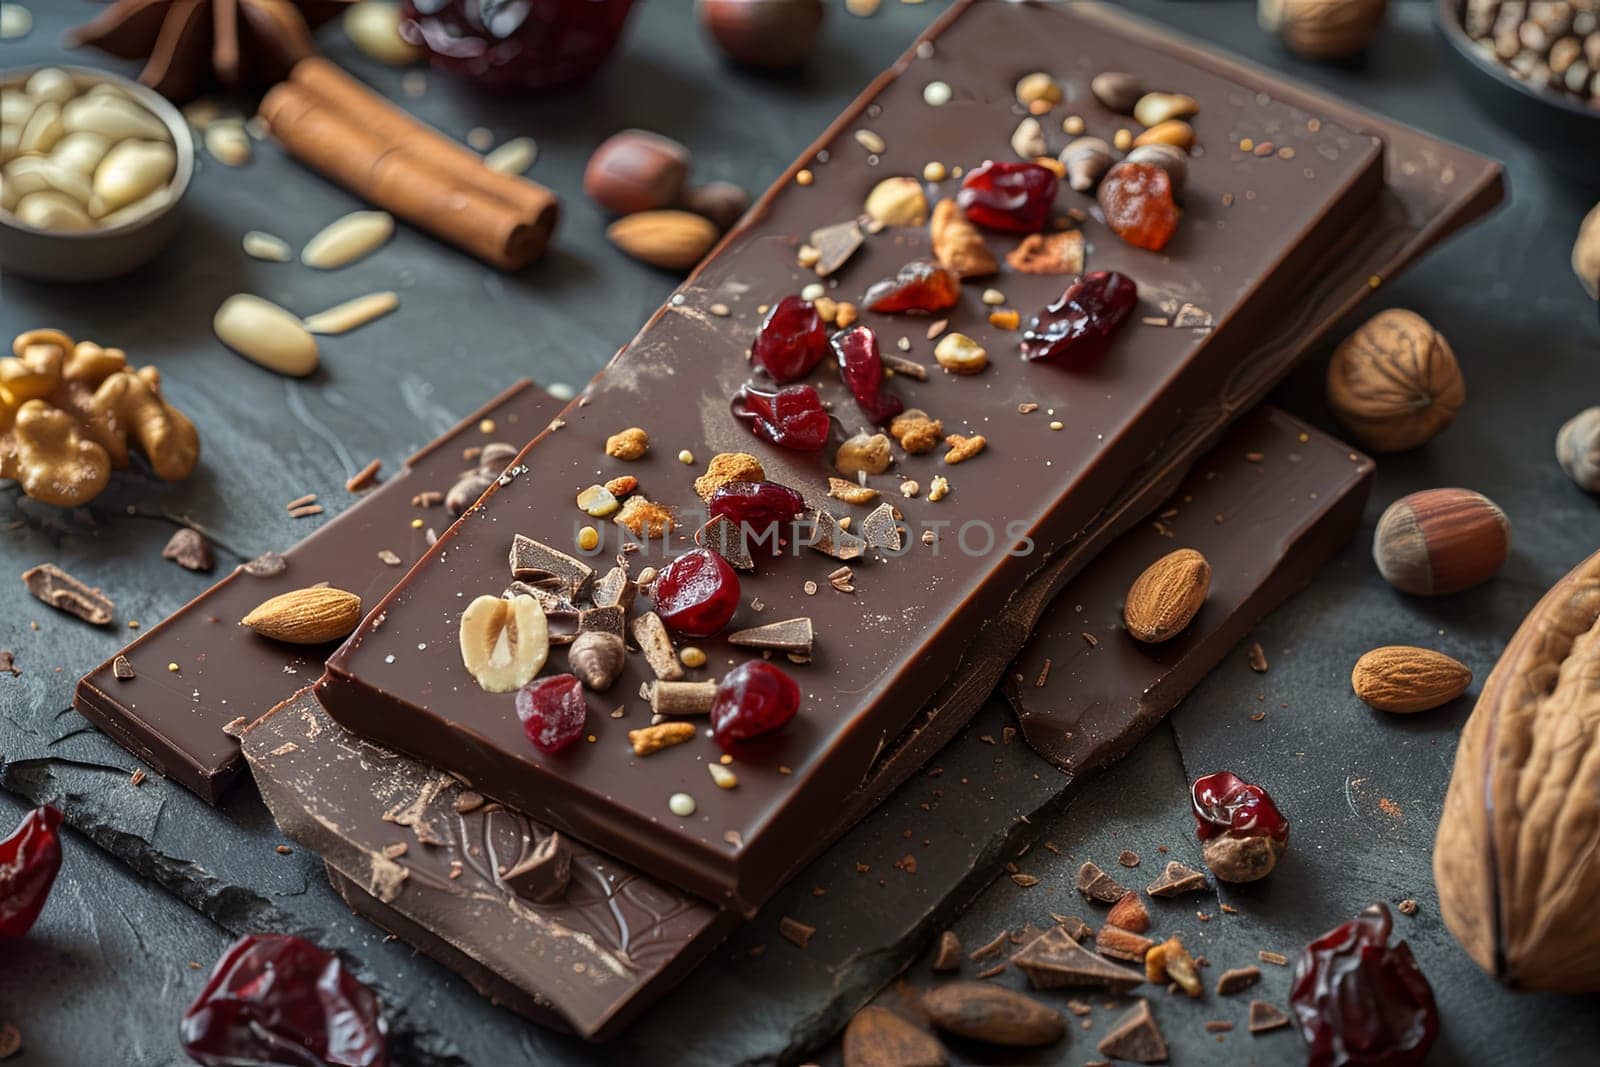 Detailed close up of a chocolate bar loaded with nuts and cranberries, showcasing rich textures and natural ingredients.